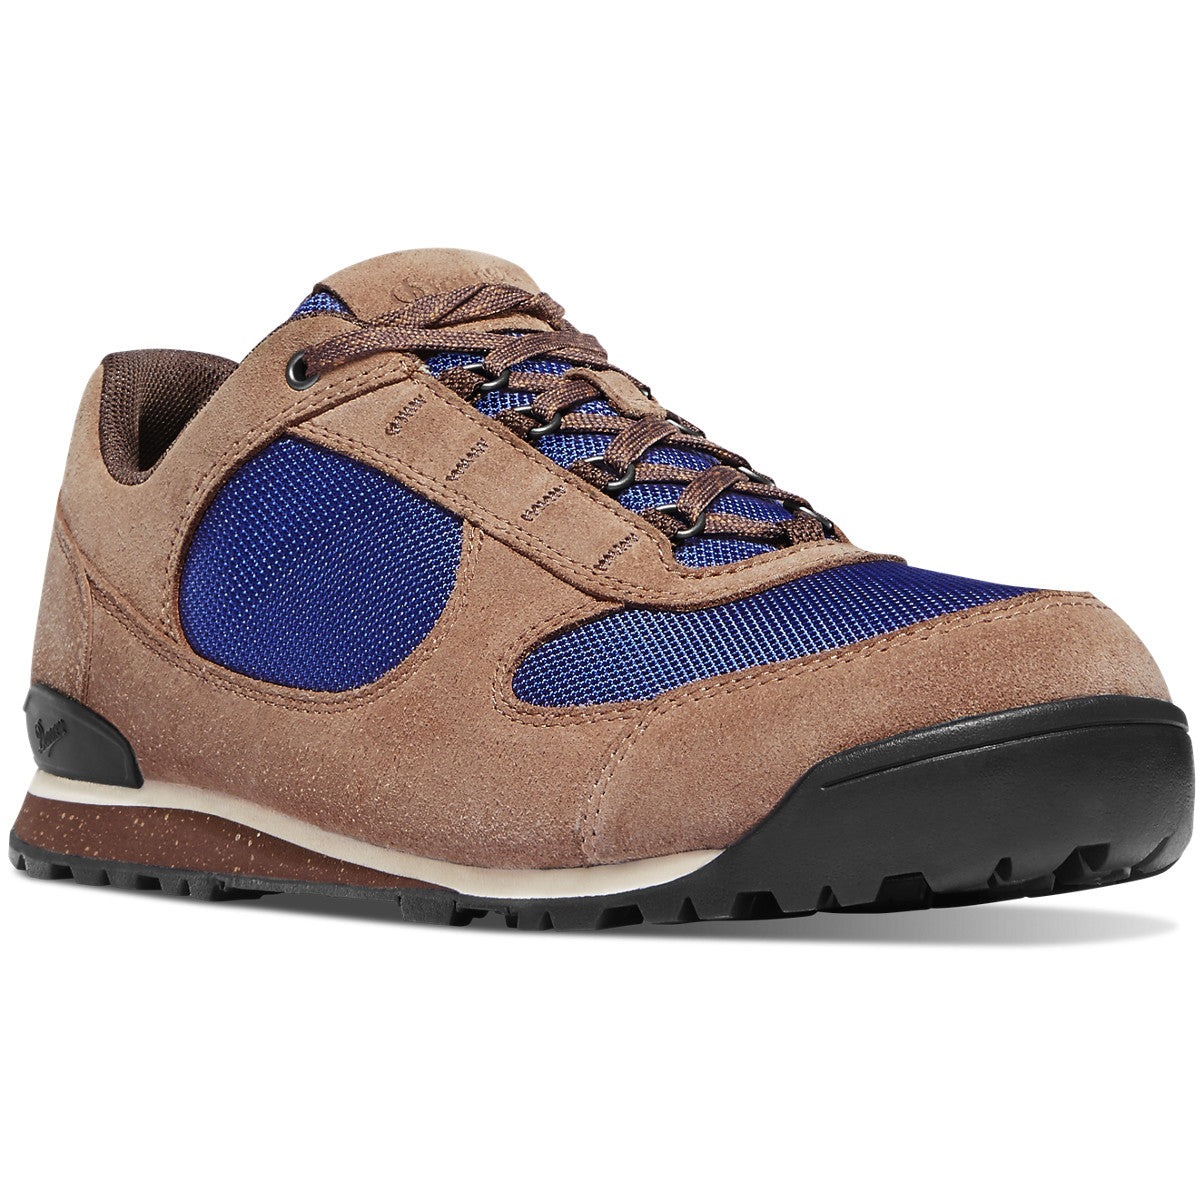 Danner Men's Jag Low 3" Hiking Shoe in Burro Brown/True Blue from the side